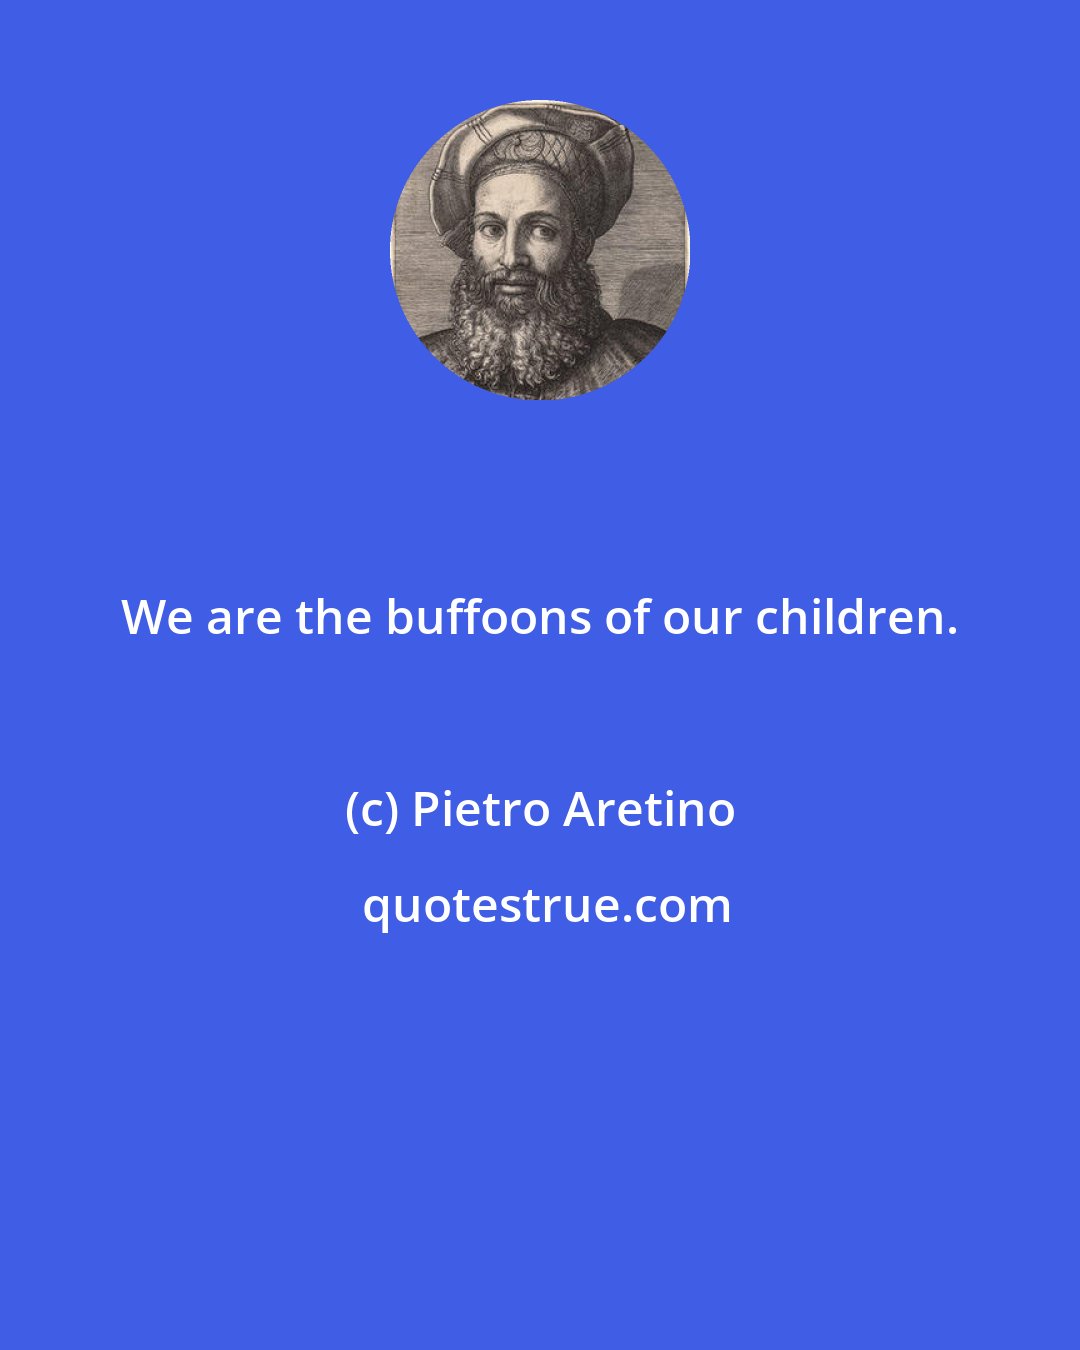 Pietro Aretino: We are the buffoons of our children.